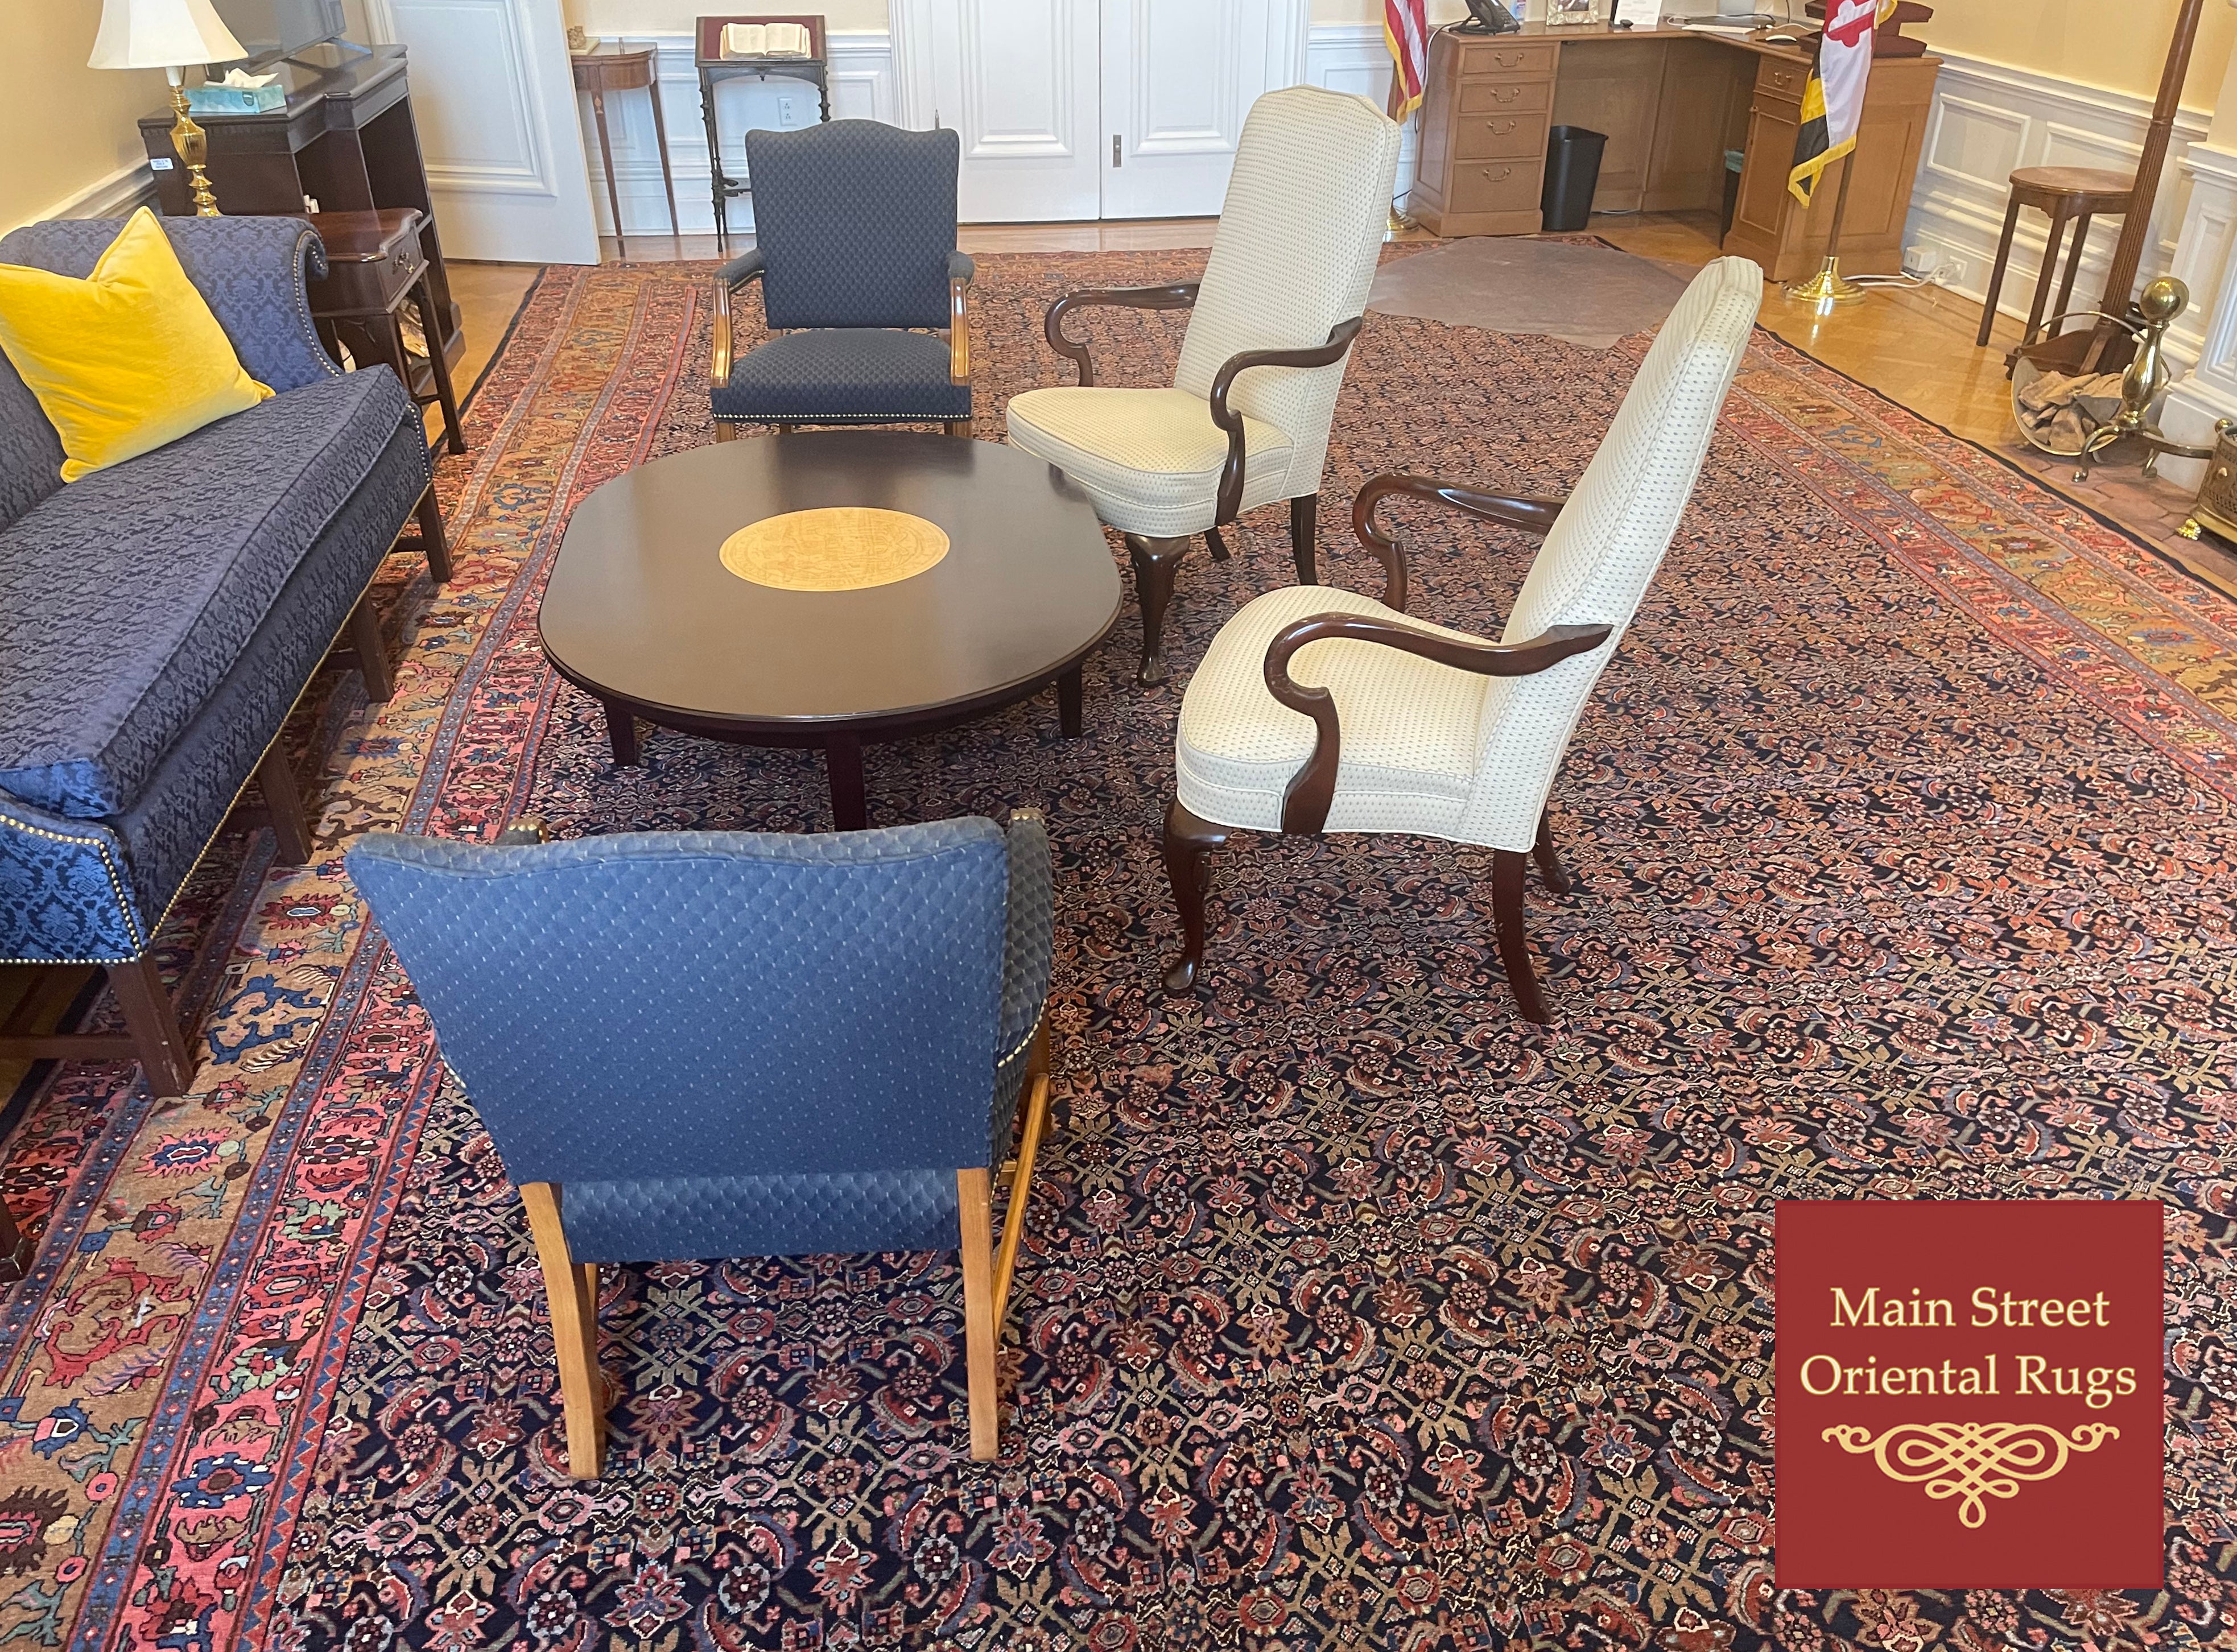 Antique Persian rug at Maryland State House in Governor's office